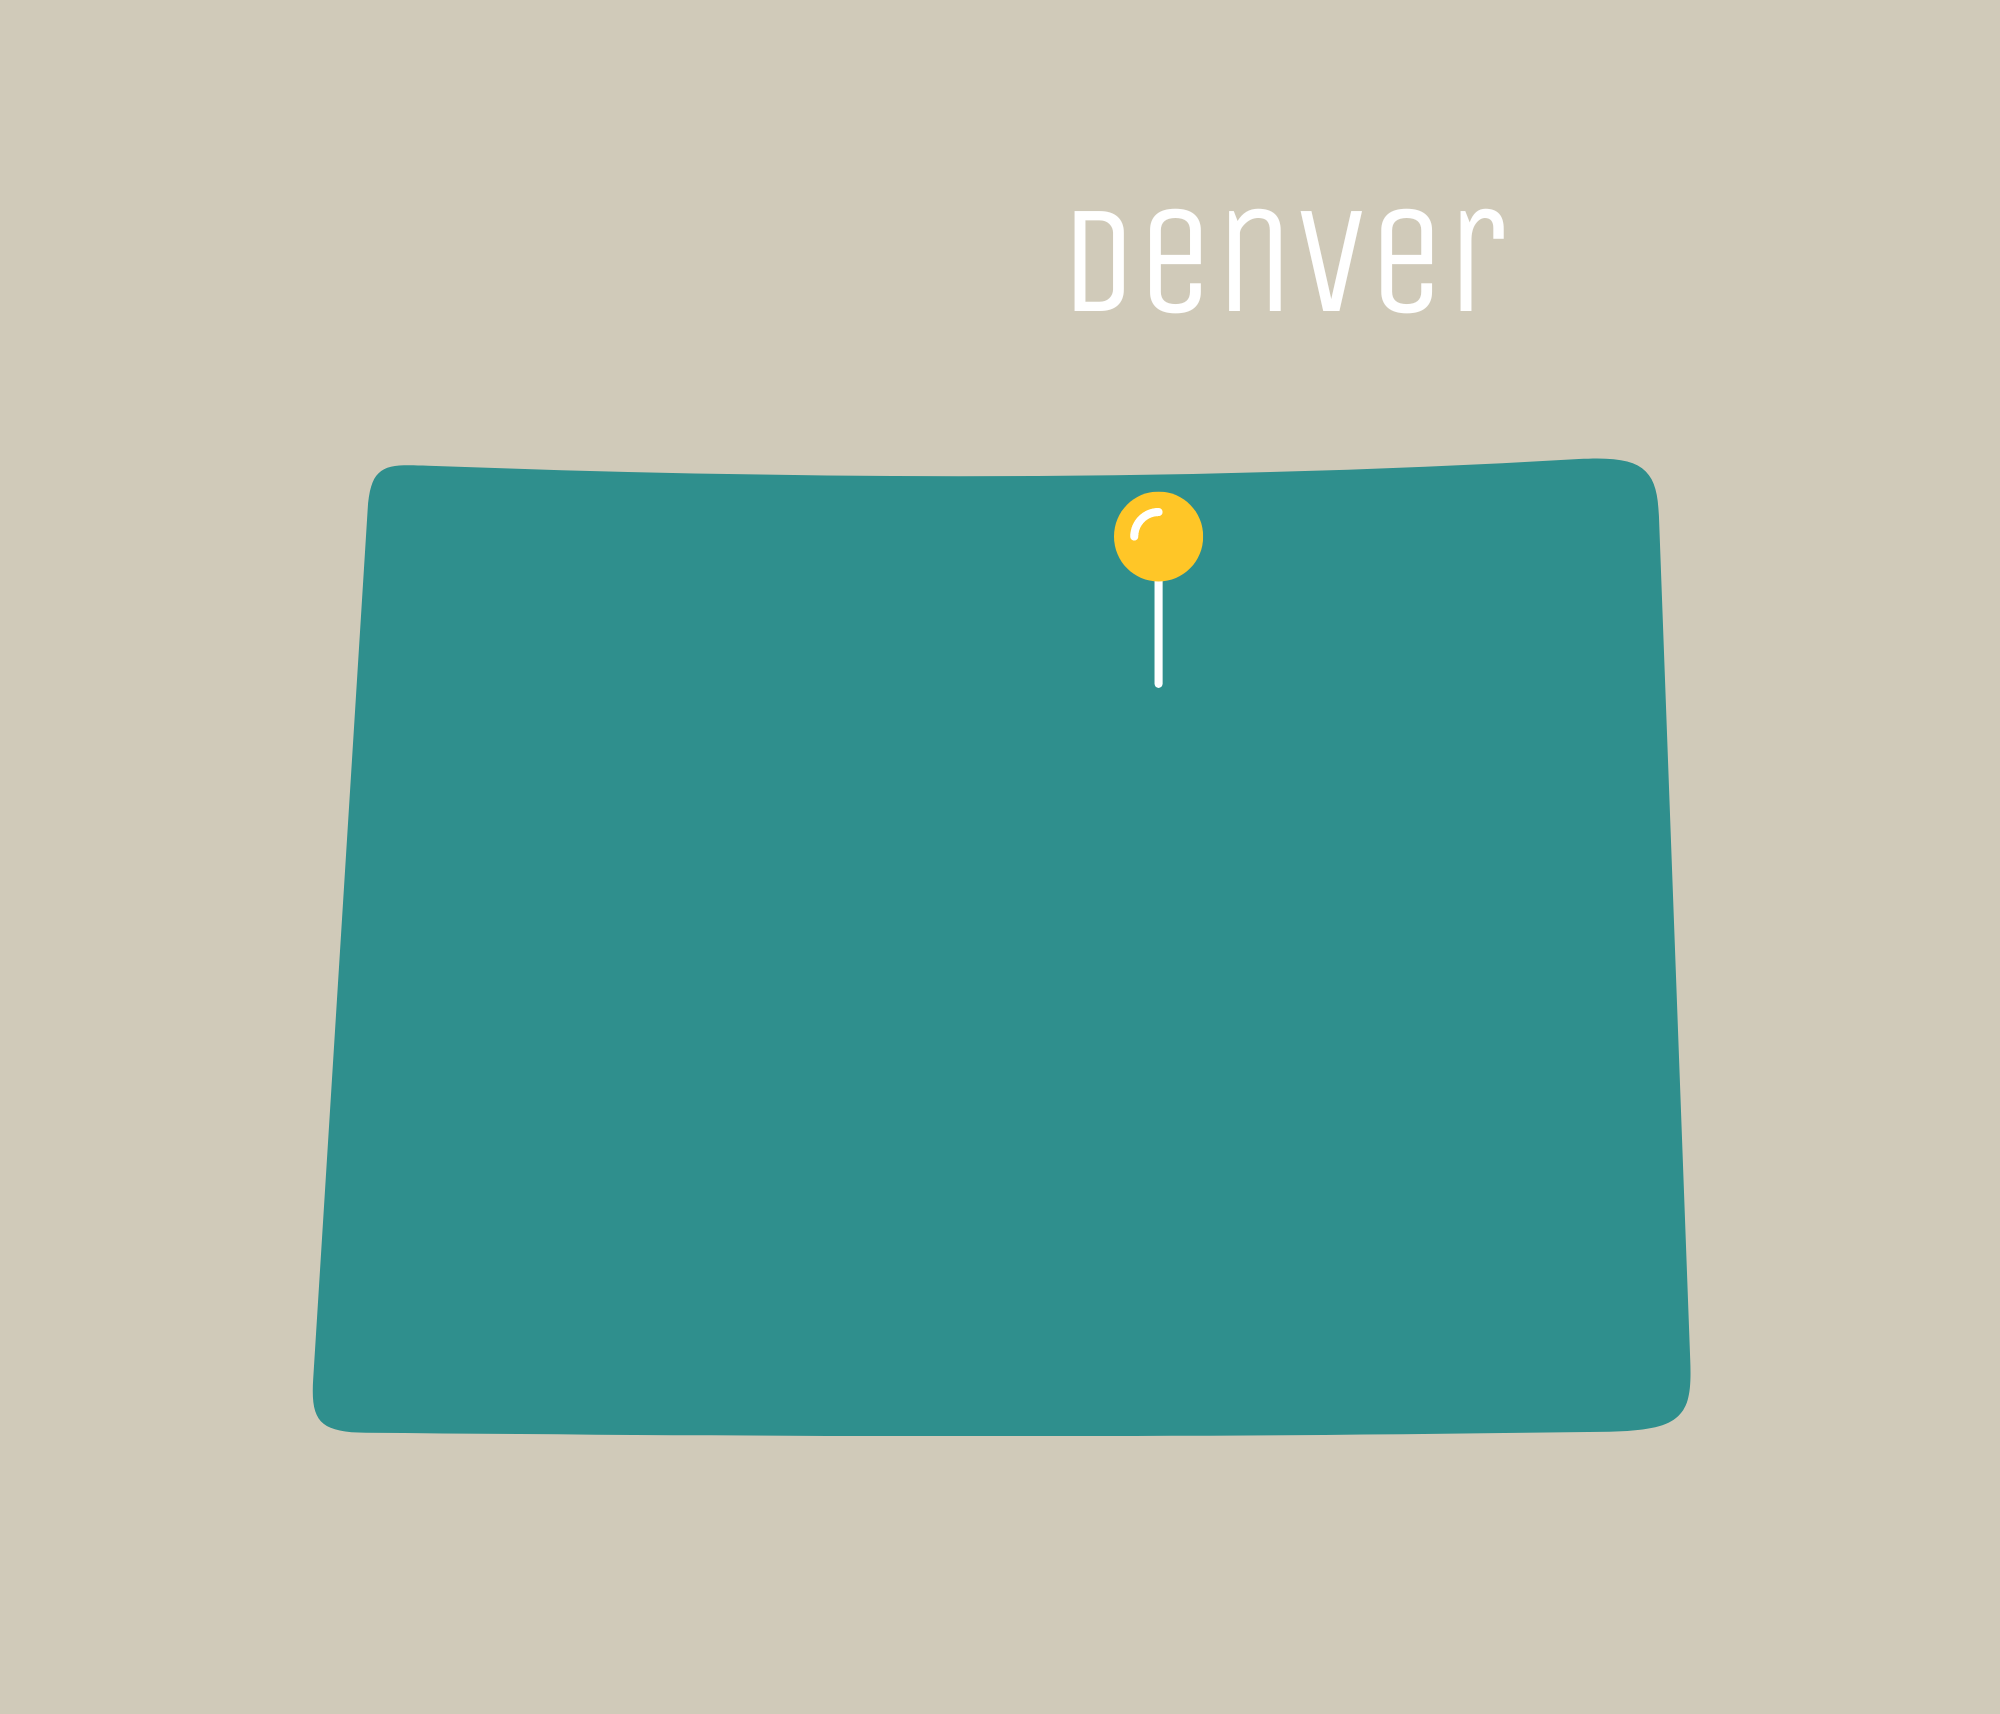 Yellow pin in the state of Colorado where Denver is